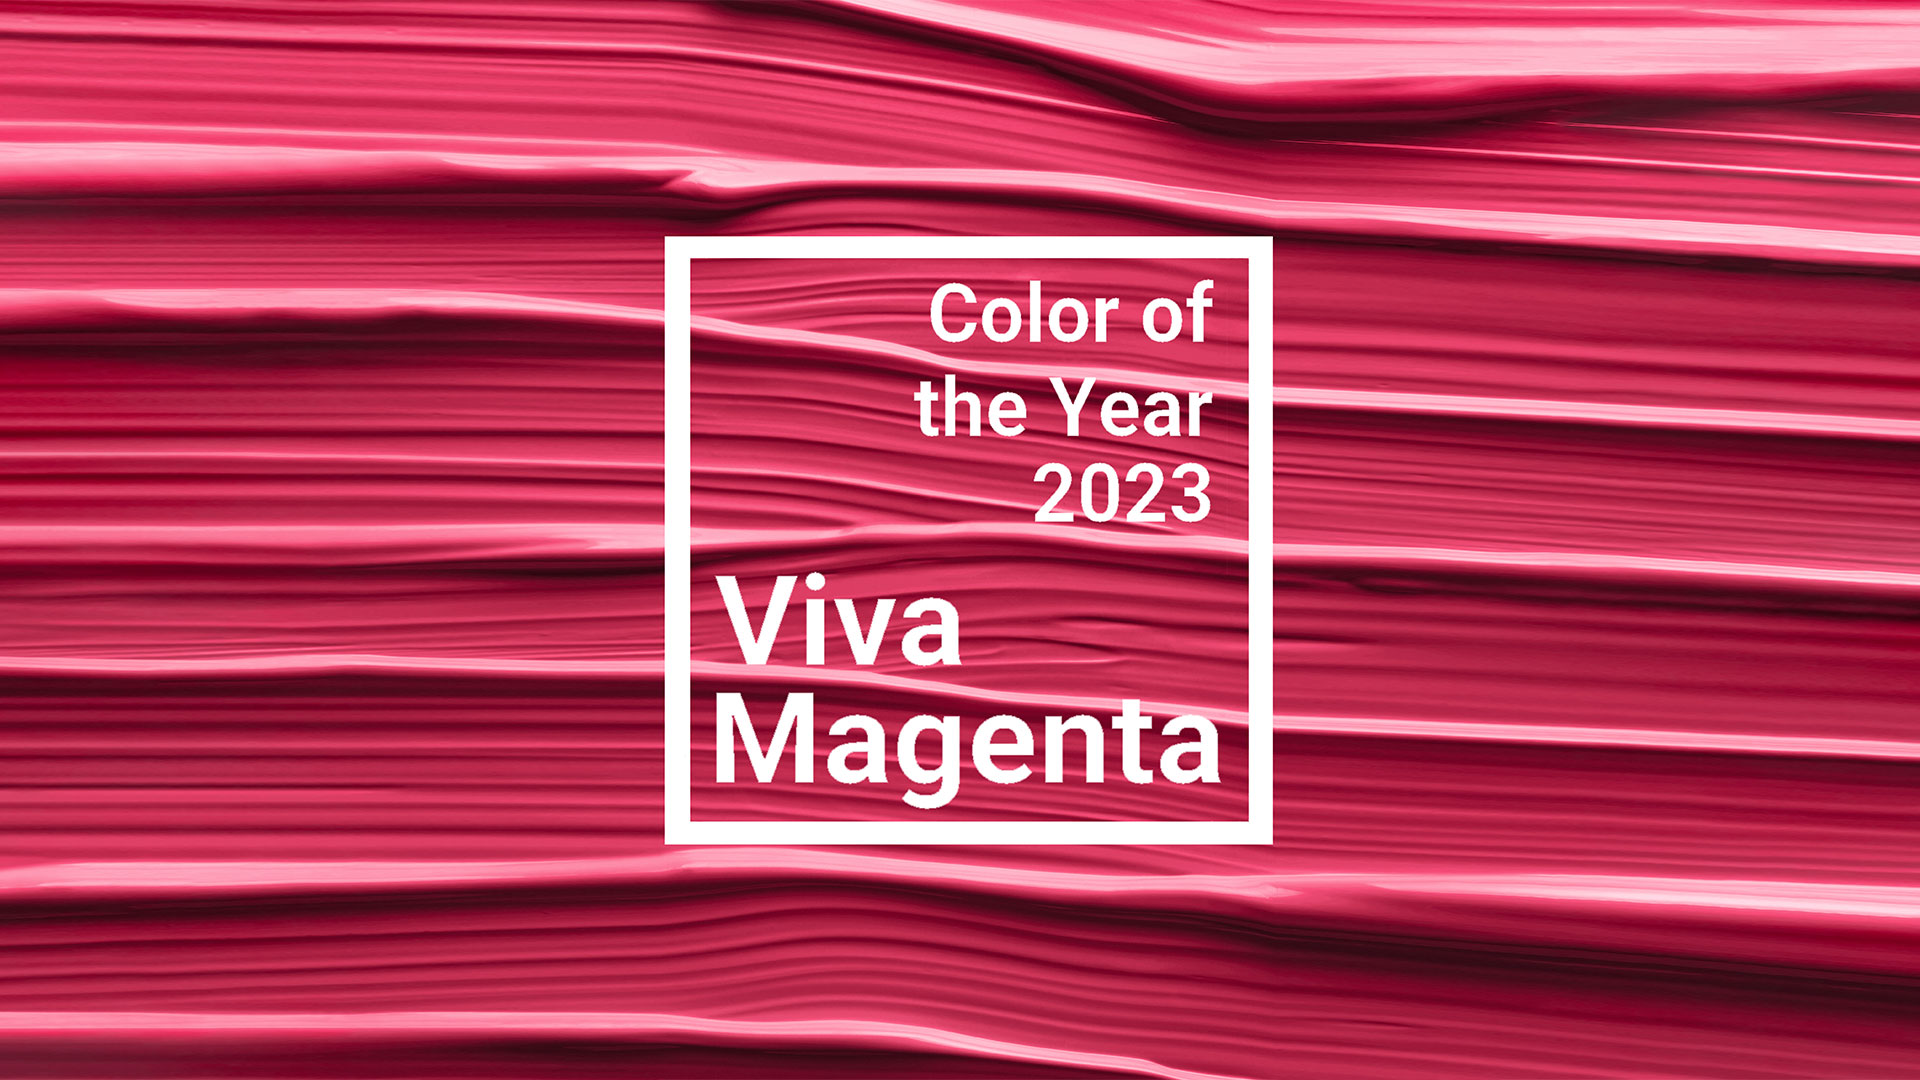 Pantone's Color of the Year for 2023: Viva Magenta - Lennar Resource Center